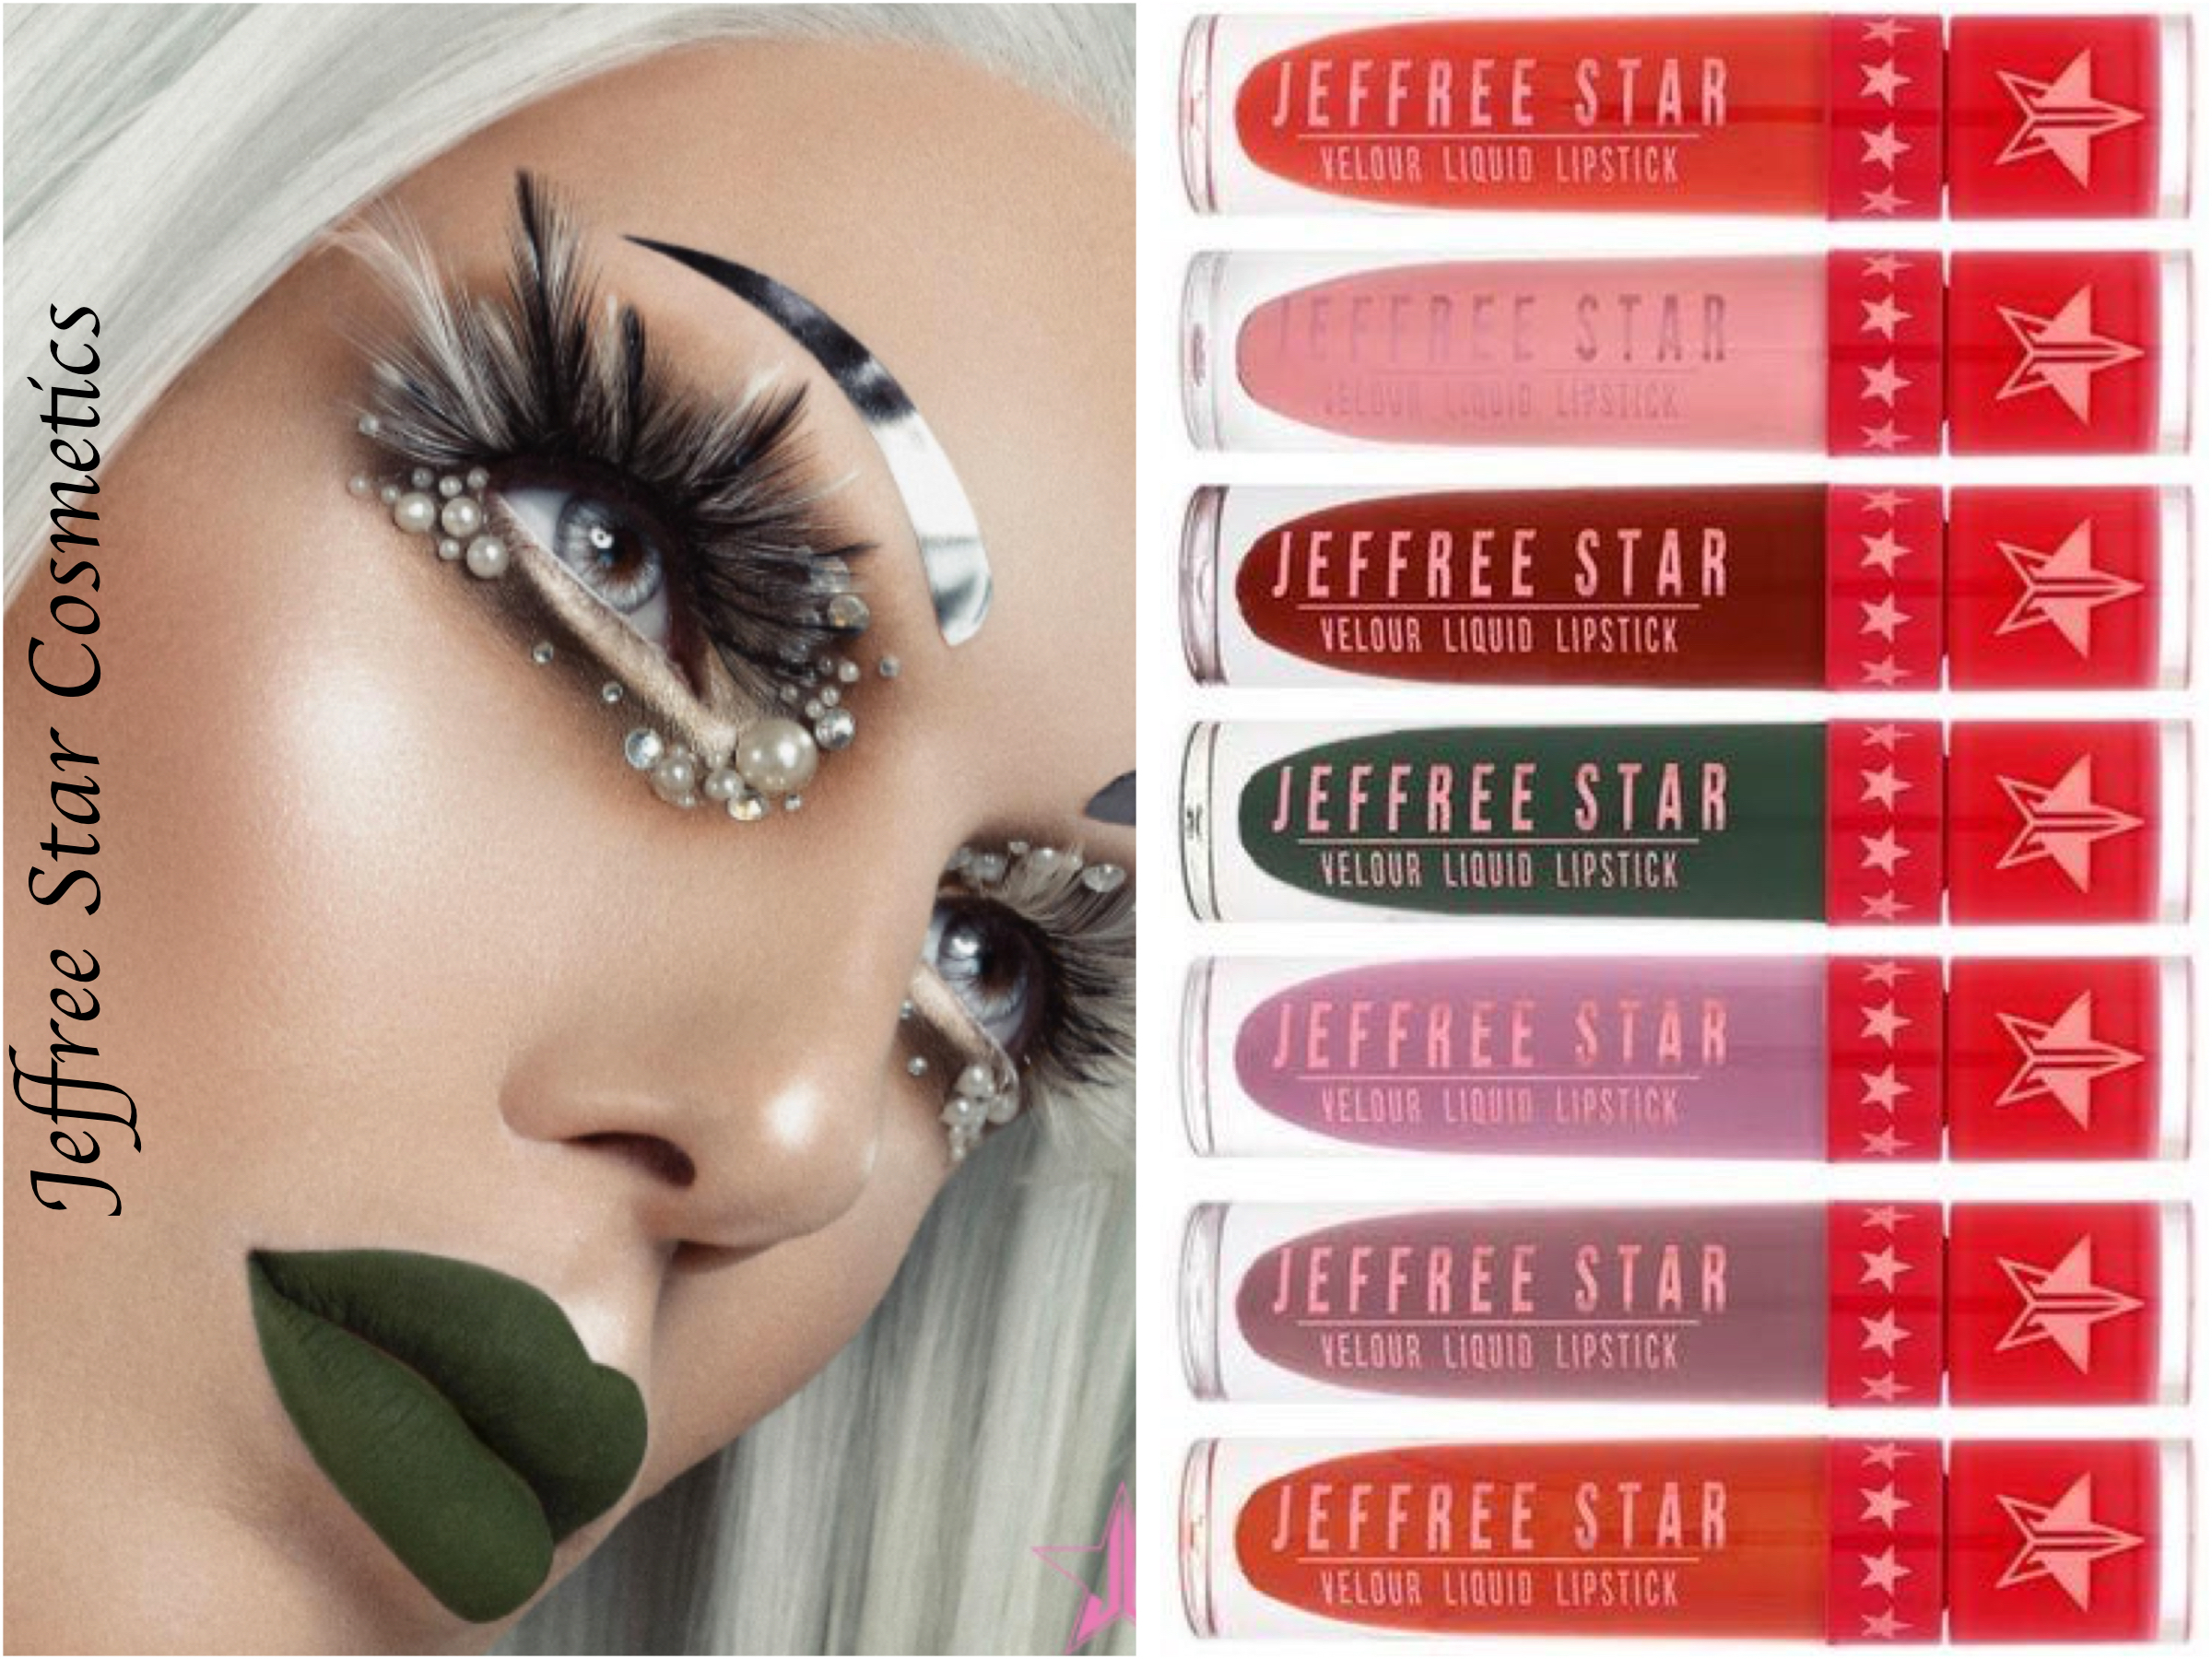 All Jeffree Star Holiday Collection 2016 Velour Liquid Lipsticks Review